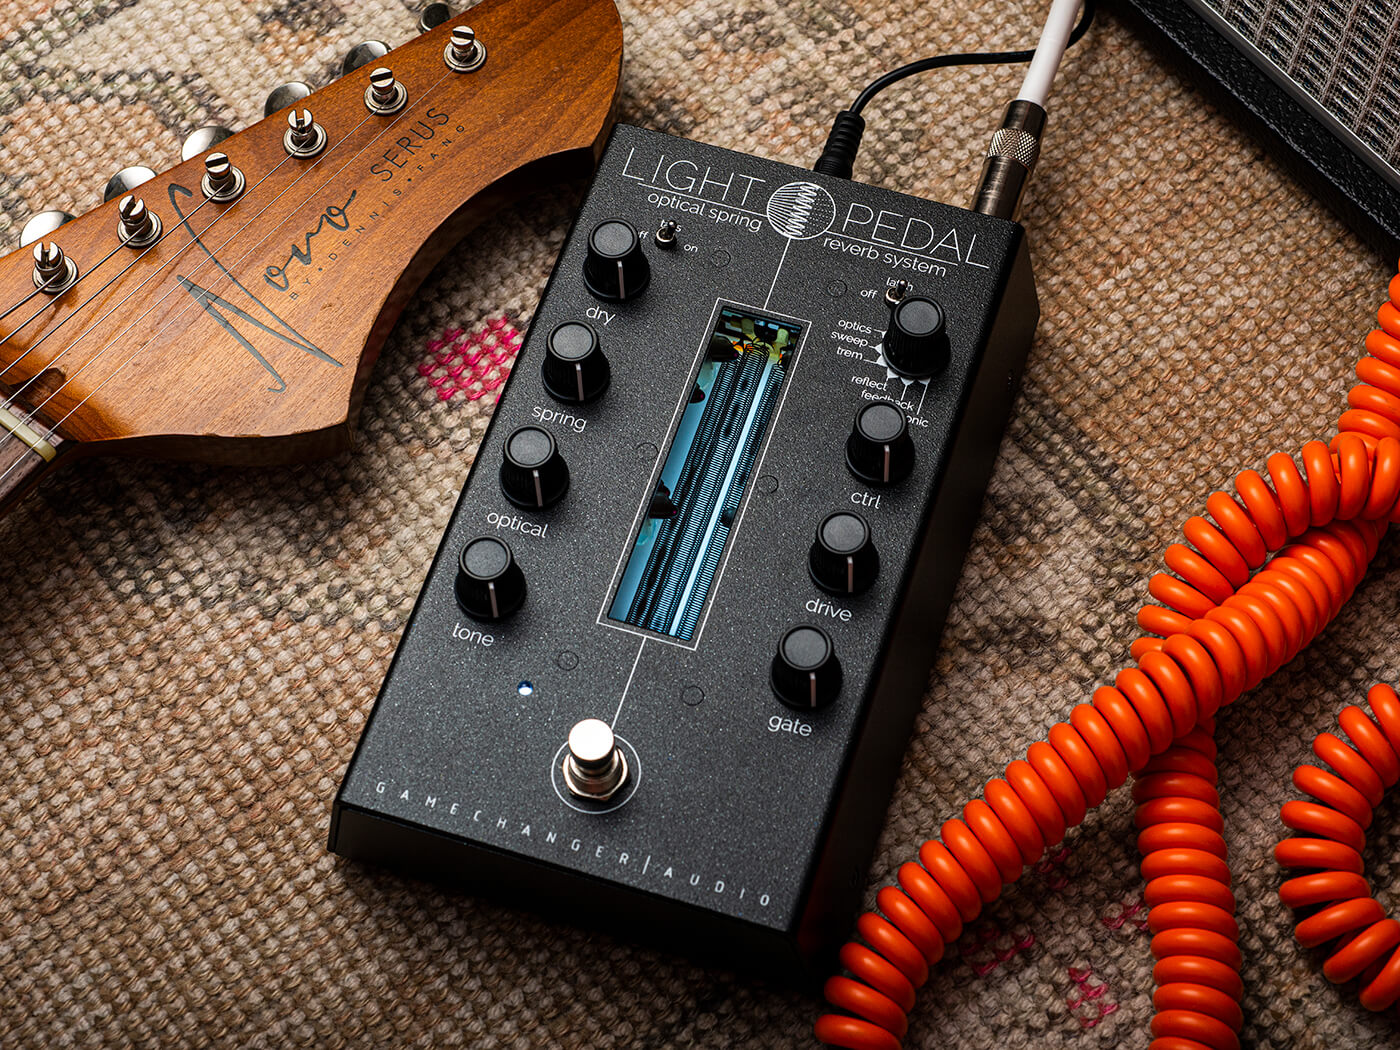 Gamechanger Audio Light Pedal review: is this analogue spring 